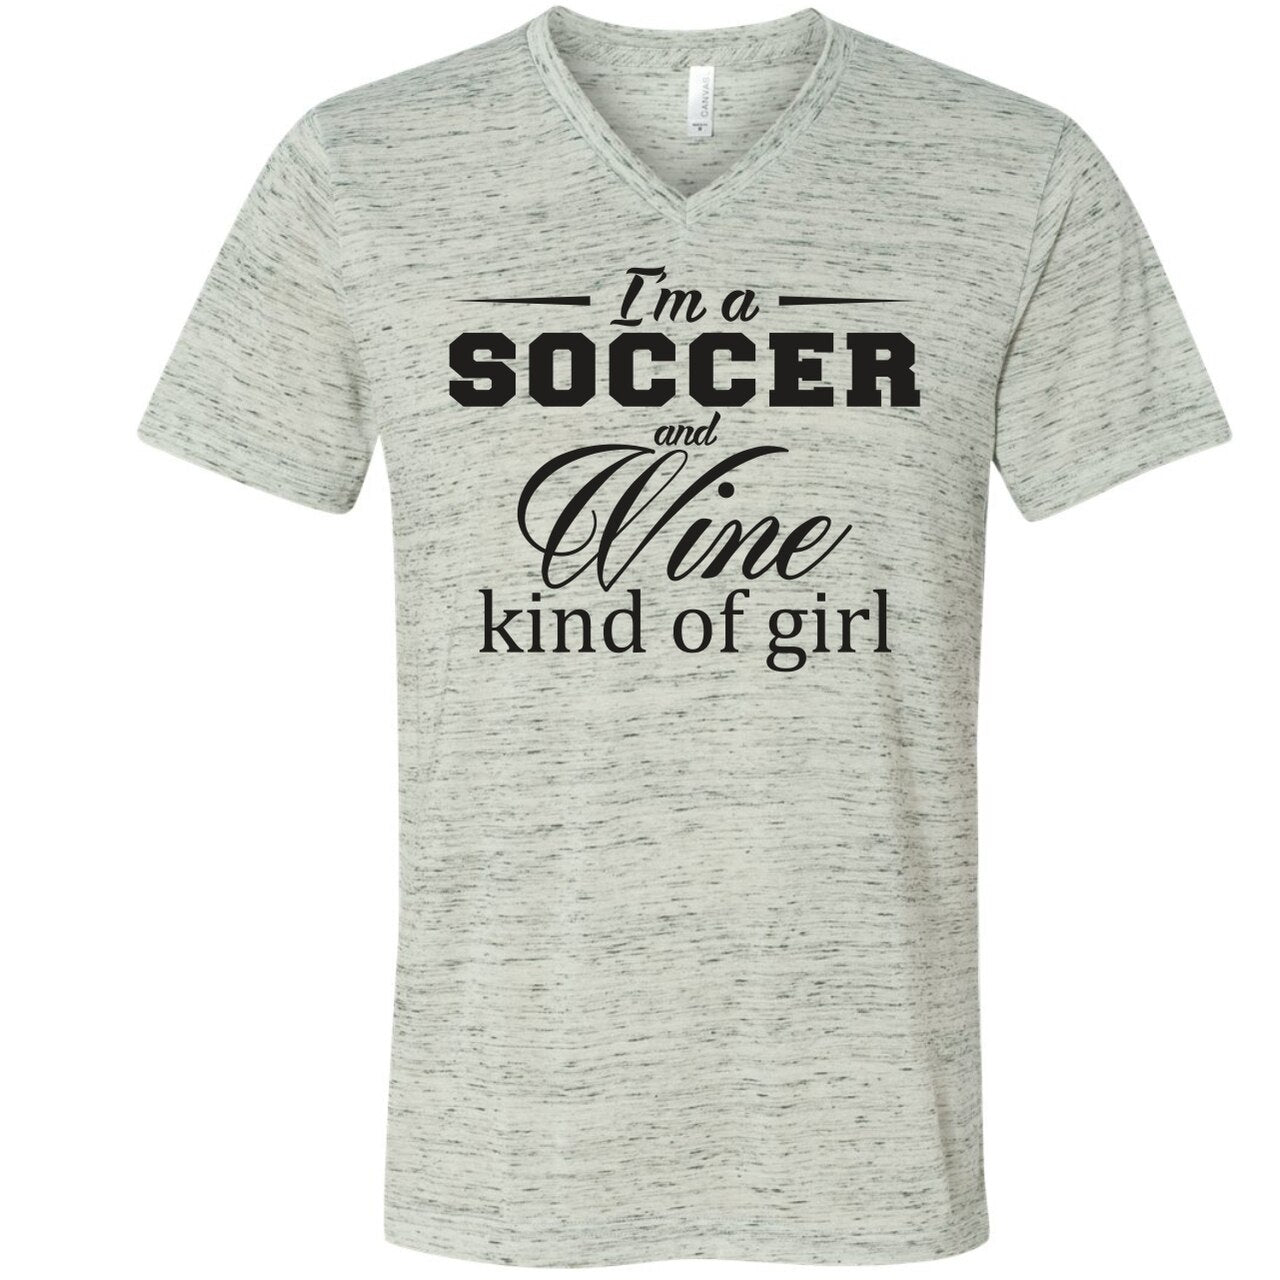 I'm A Soccer and Wine Kind of Girl - White Marble Tee - The Graphic Tee